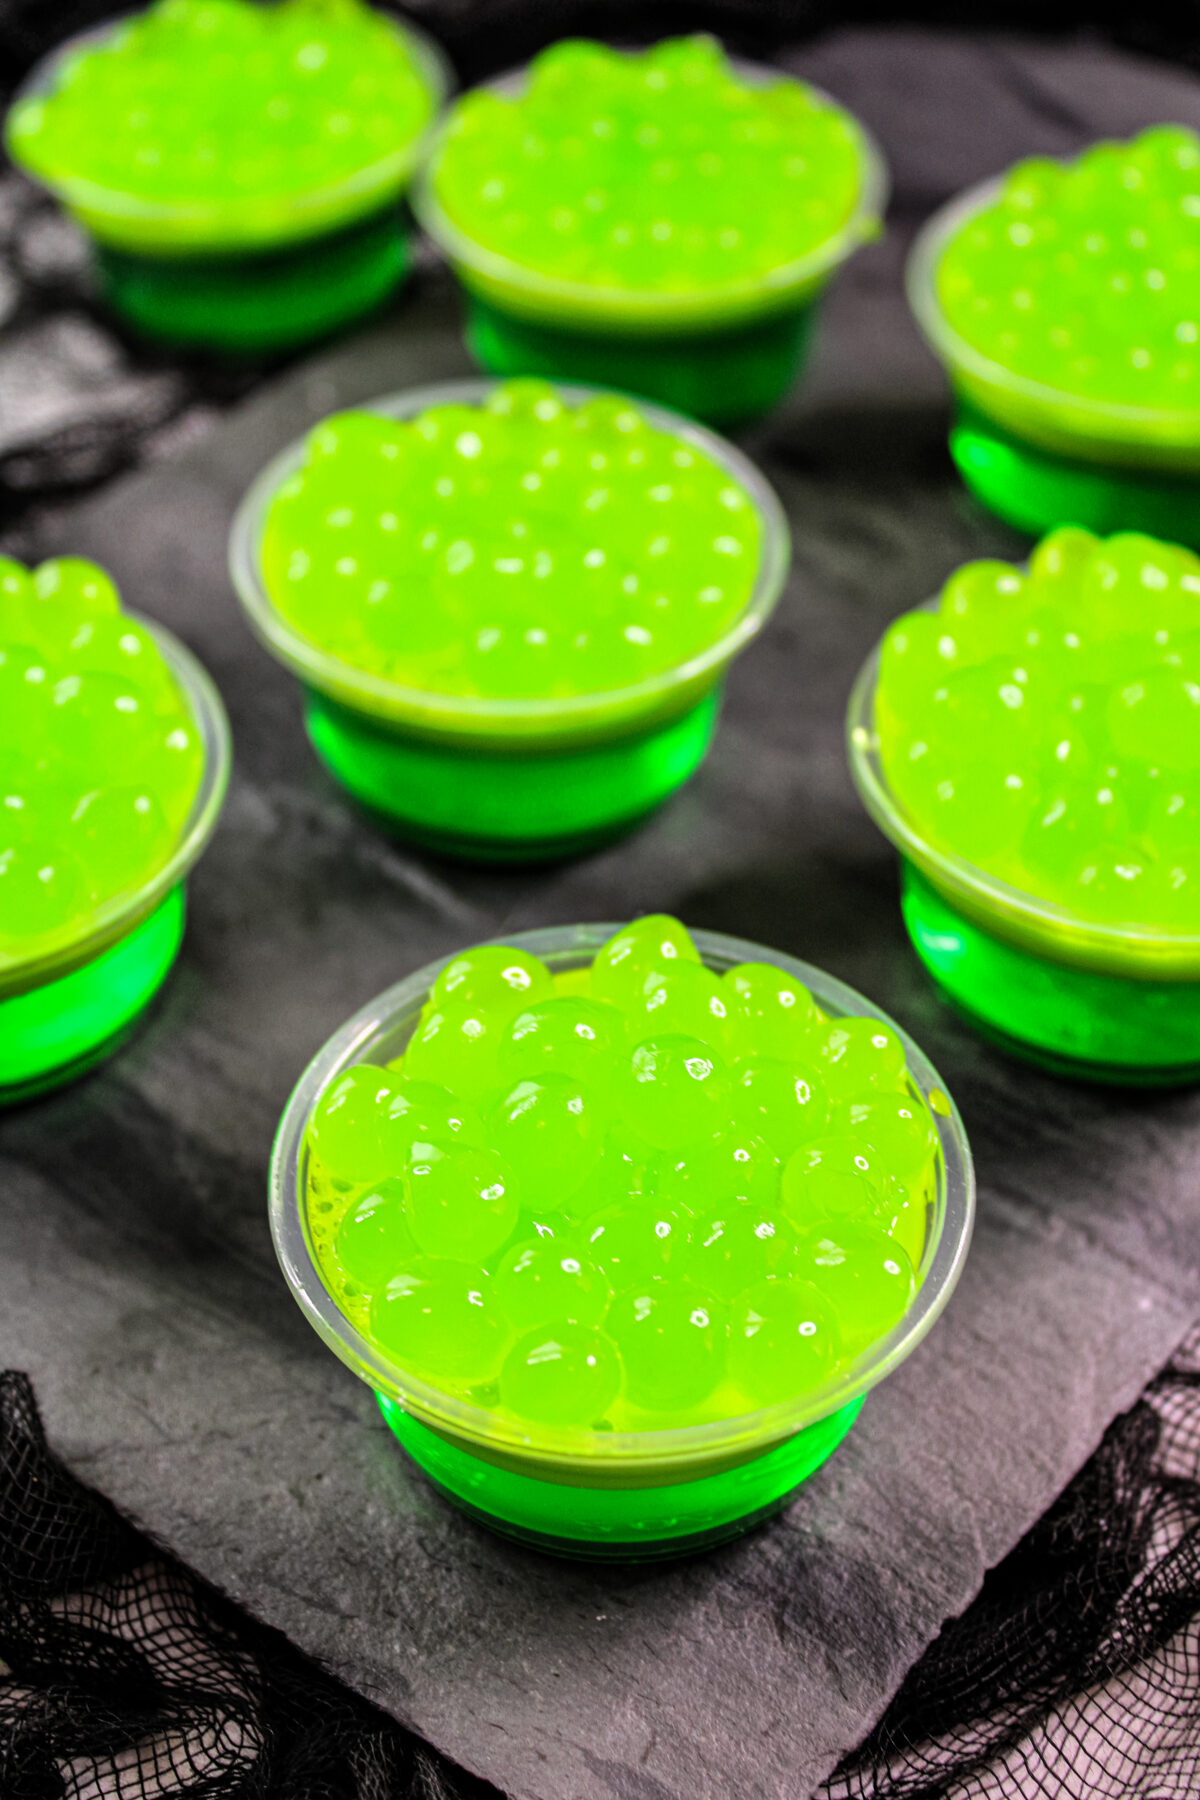 These spooky Witch's Brew Jello Shots are perfect for your Halloween party! Green apple flavoured and easy to make, they're sure to be a hit.